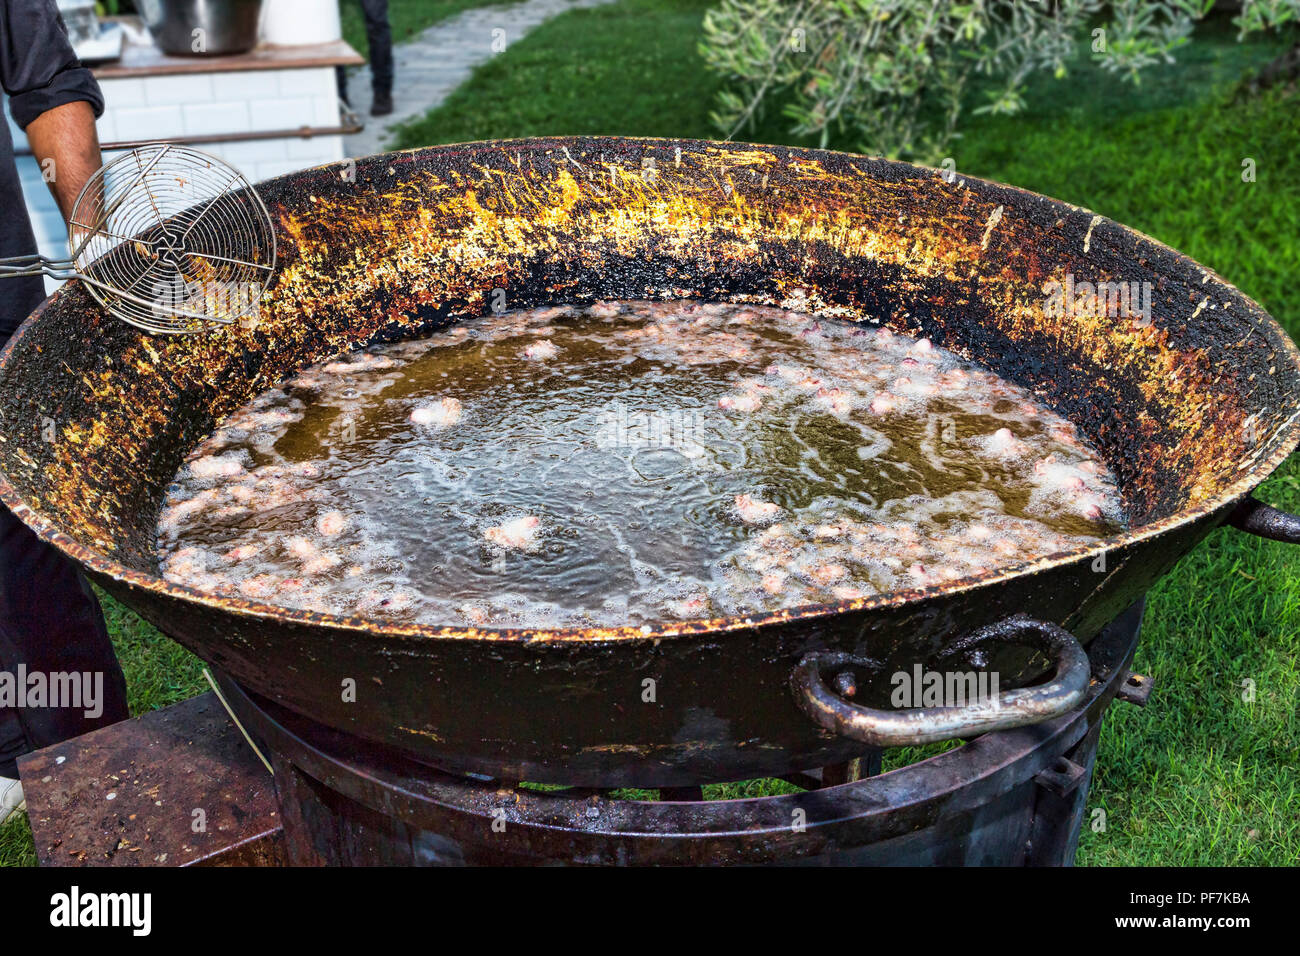 https://c8.alamy.com/comp/PF7KBA/giant-pot-with-hot-oil-to-fry-delicacies-during-an-outdoor-party-PF7KBA.jpg